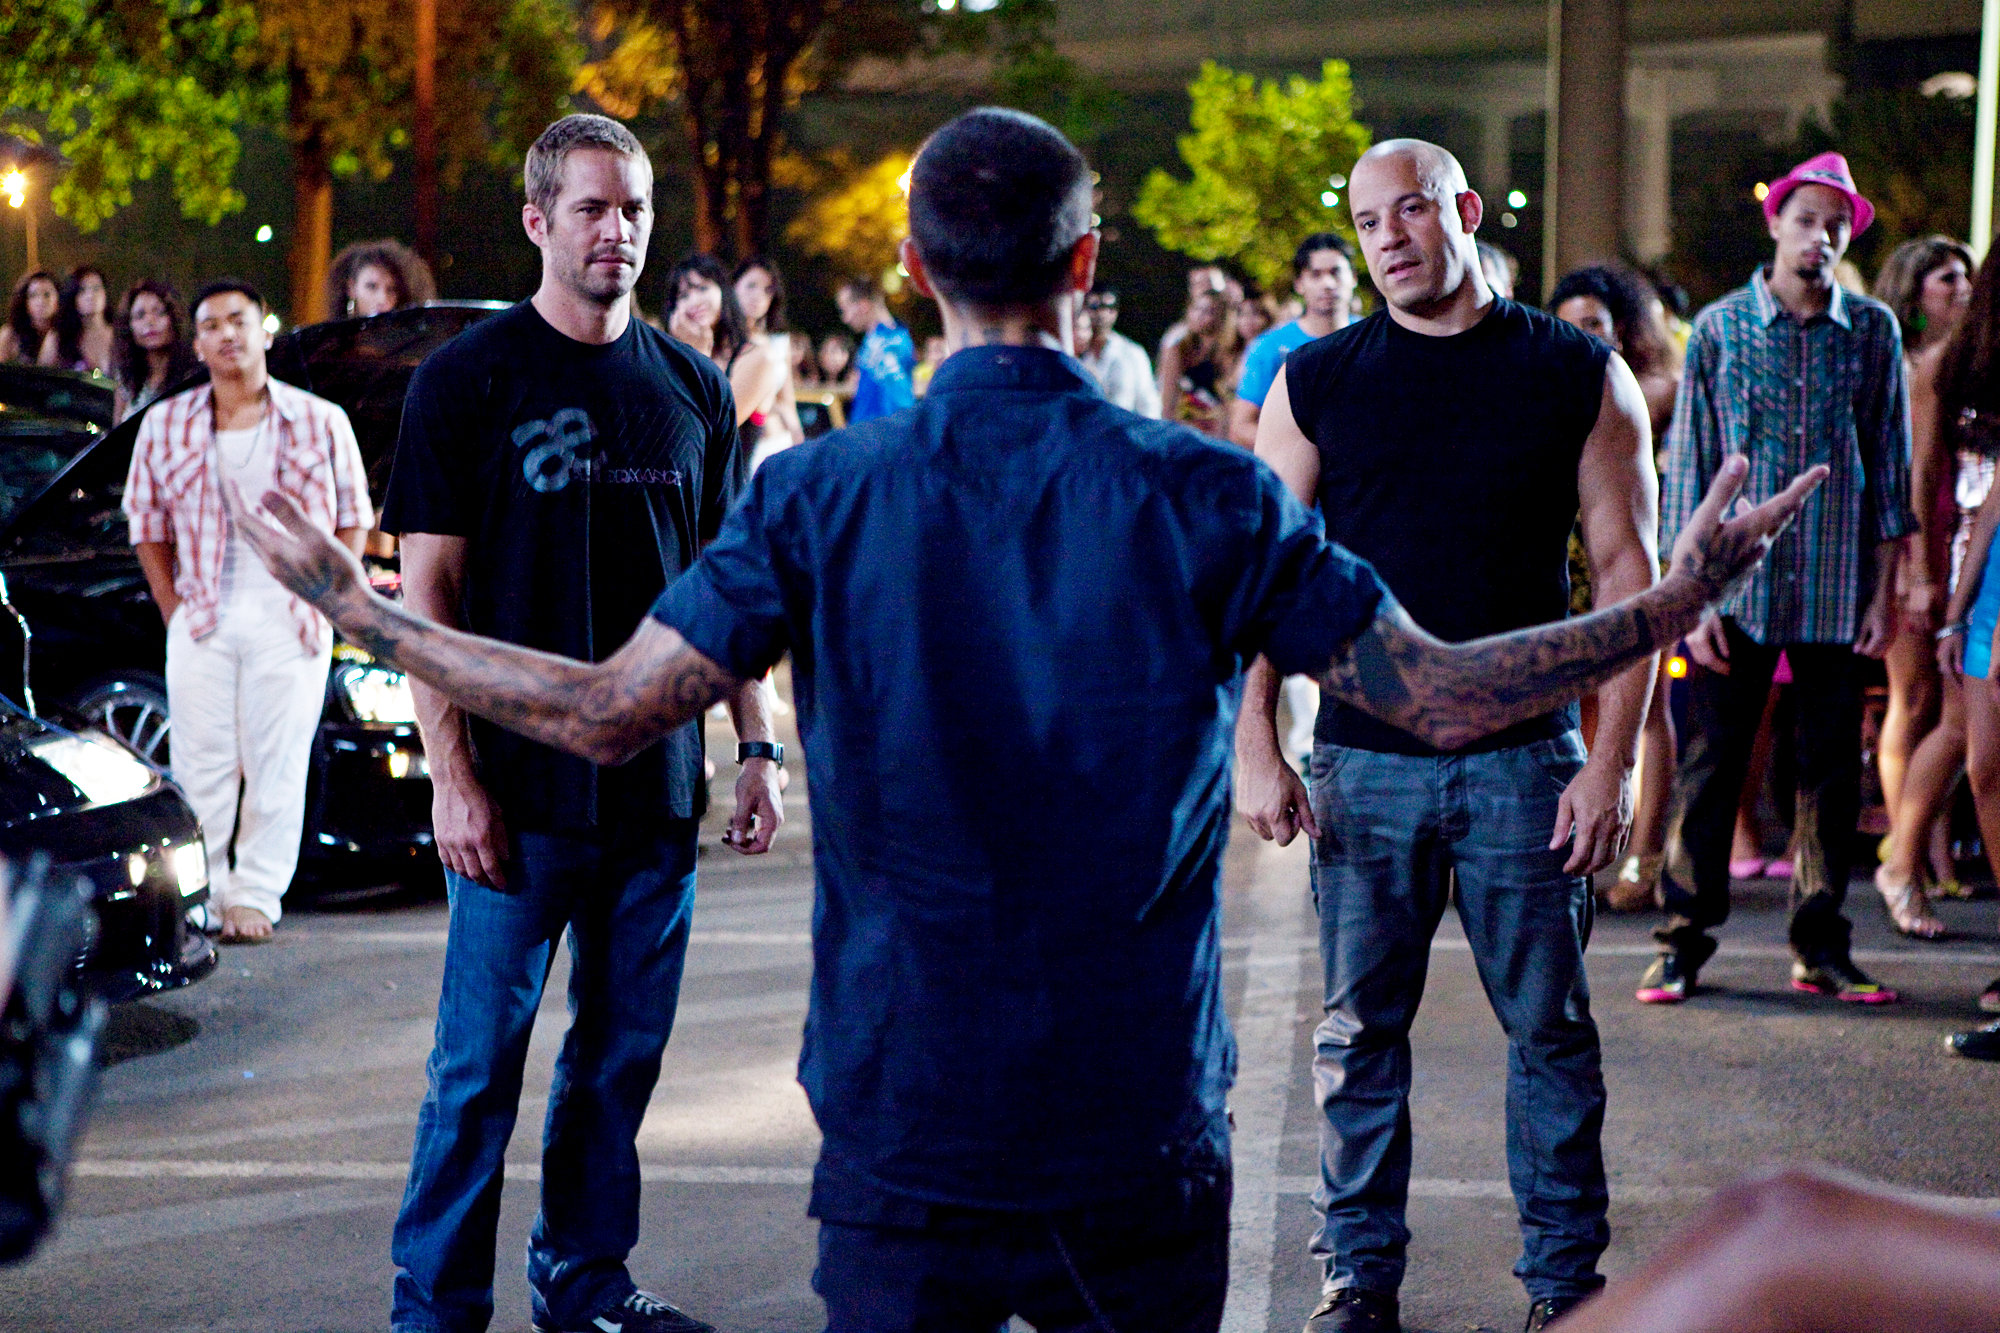 Paul Walker stars as Brian O'Conner and Vin Diesel stars as Dominic Toretto in Universal Pictures' Fast Five (2011)